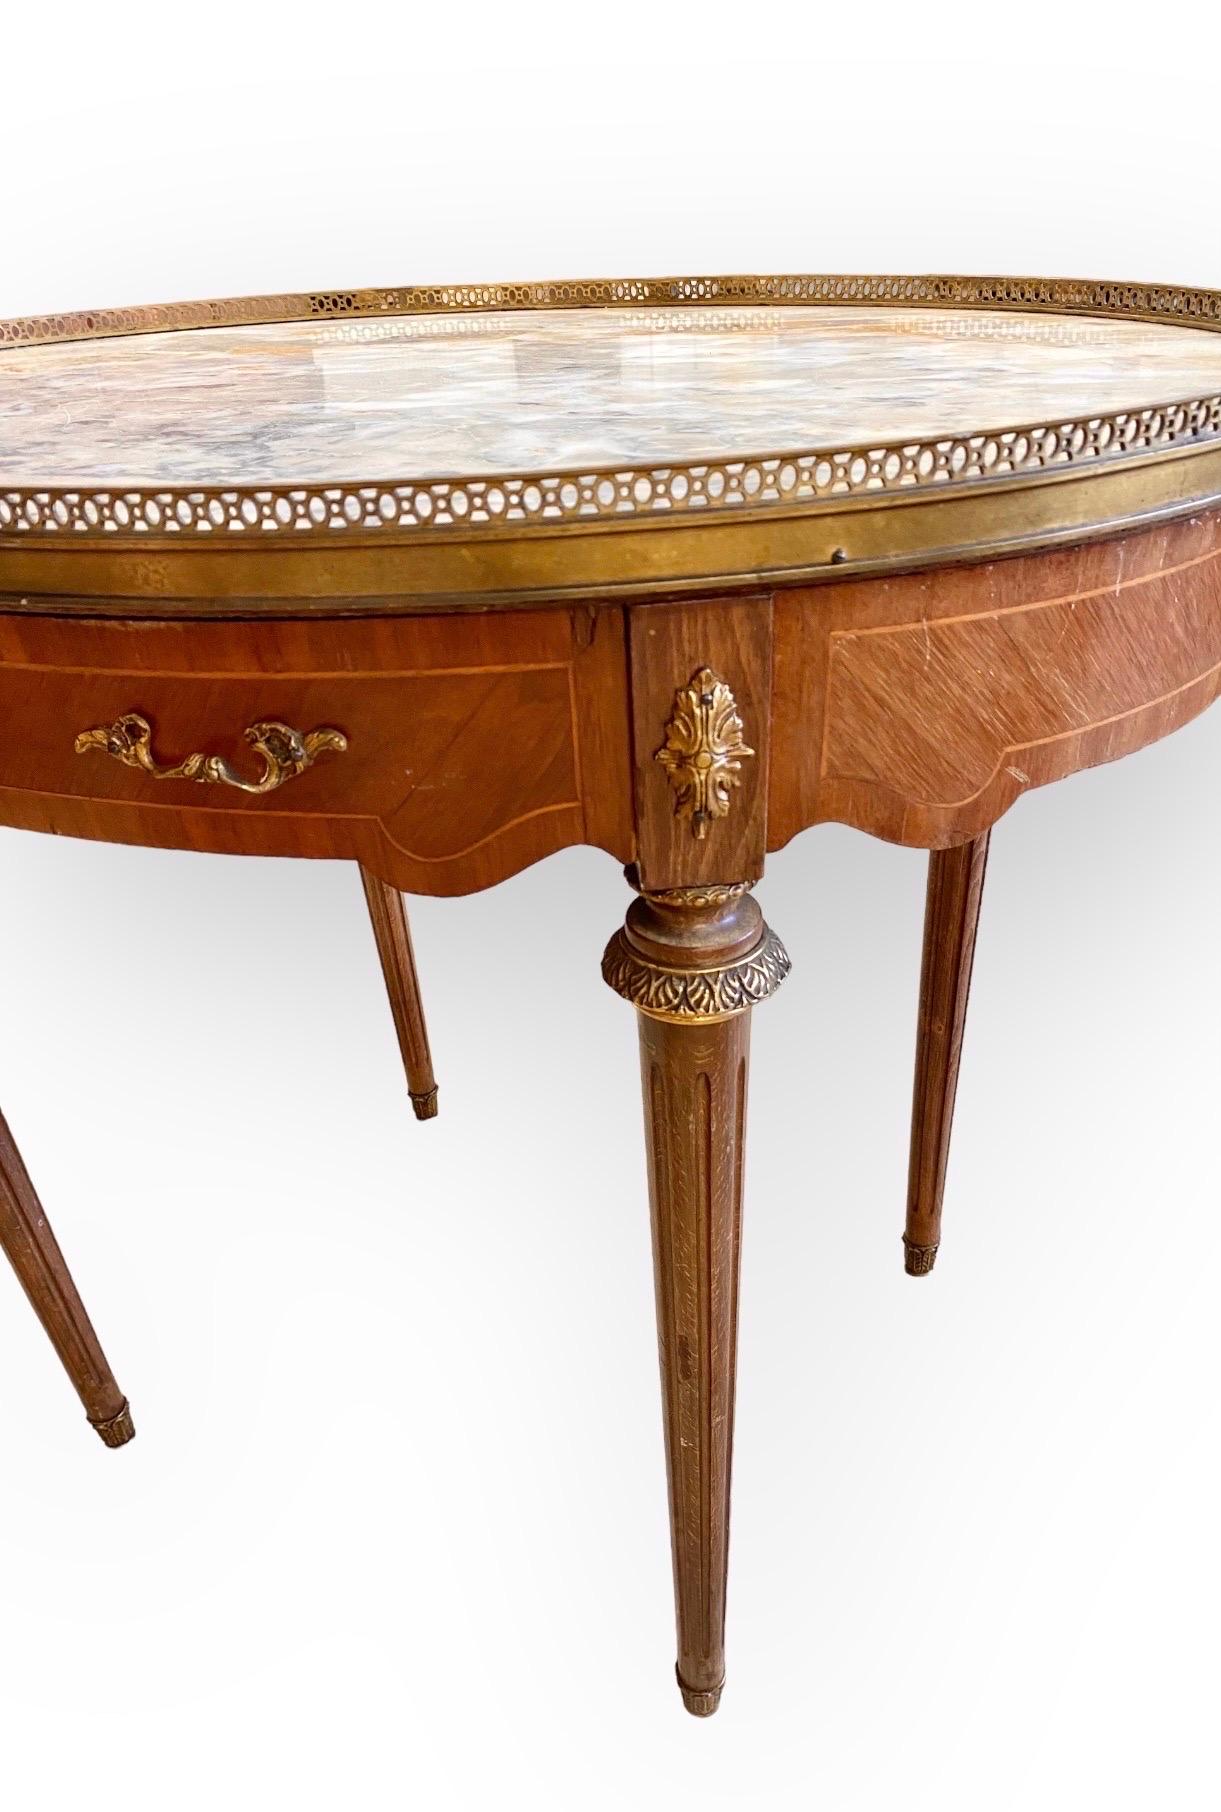 Mid-20th Century French Louis XVI Style Inlaid Carved Walnut Marble Top Bouillote Table, 20th C.  For Sale